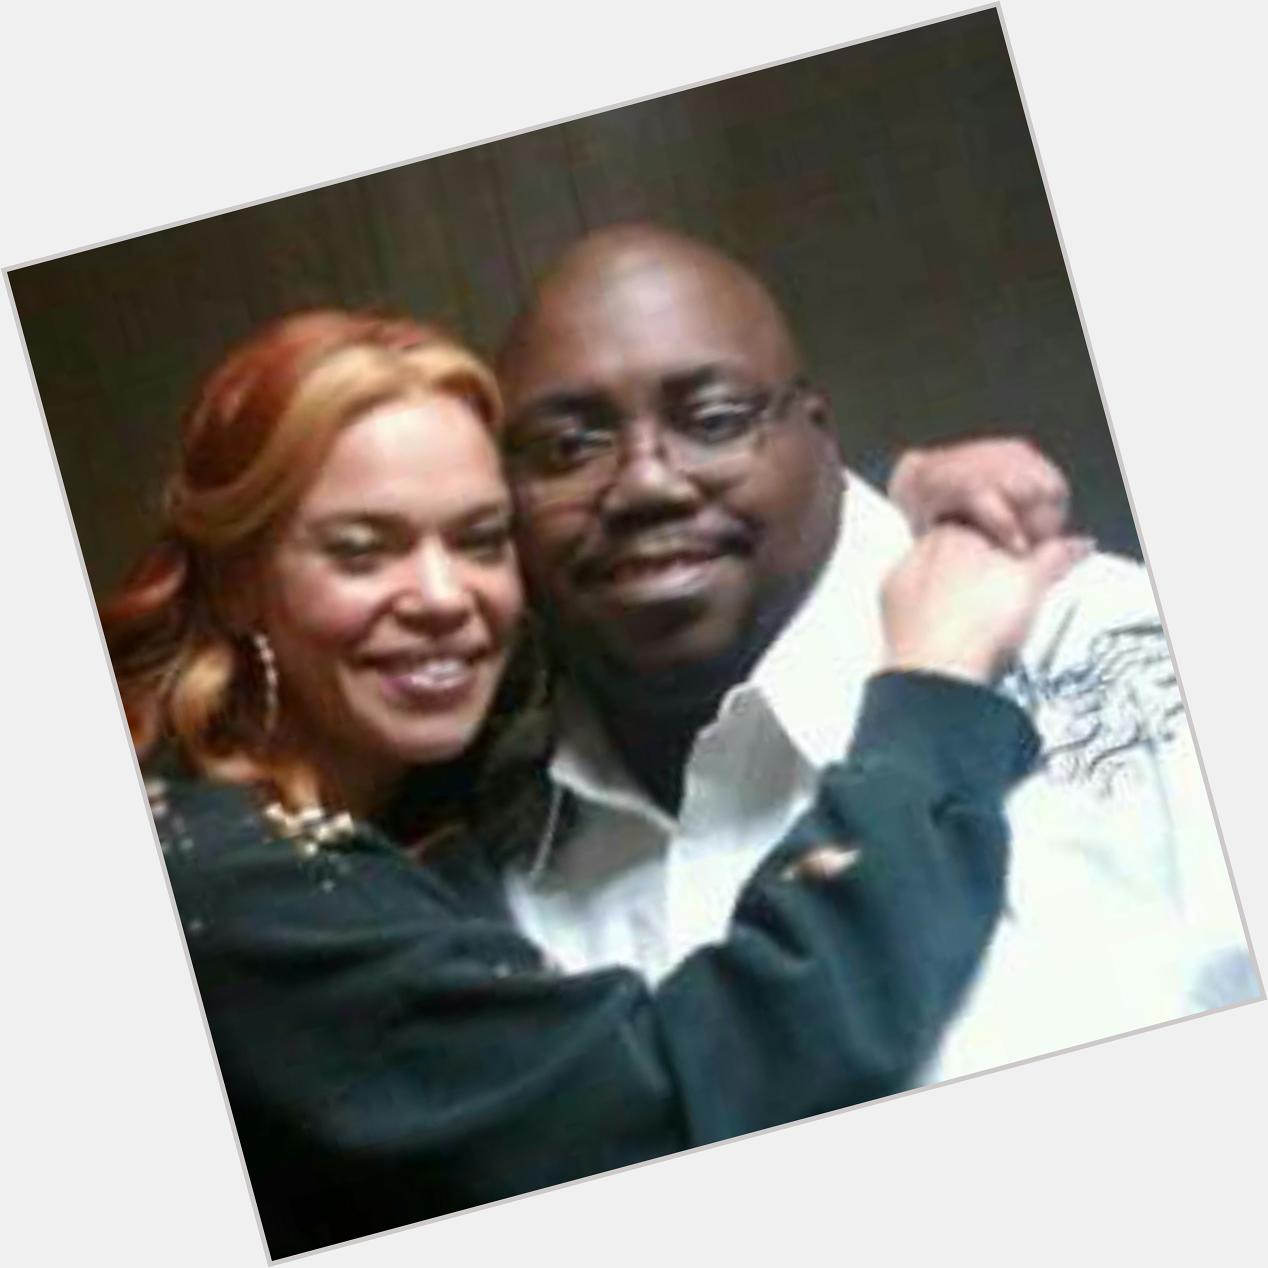  Hey Wishing My friend The Best Female Singer in the World Faith Evans Happy Birthday Enjoy your day... 